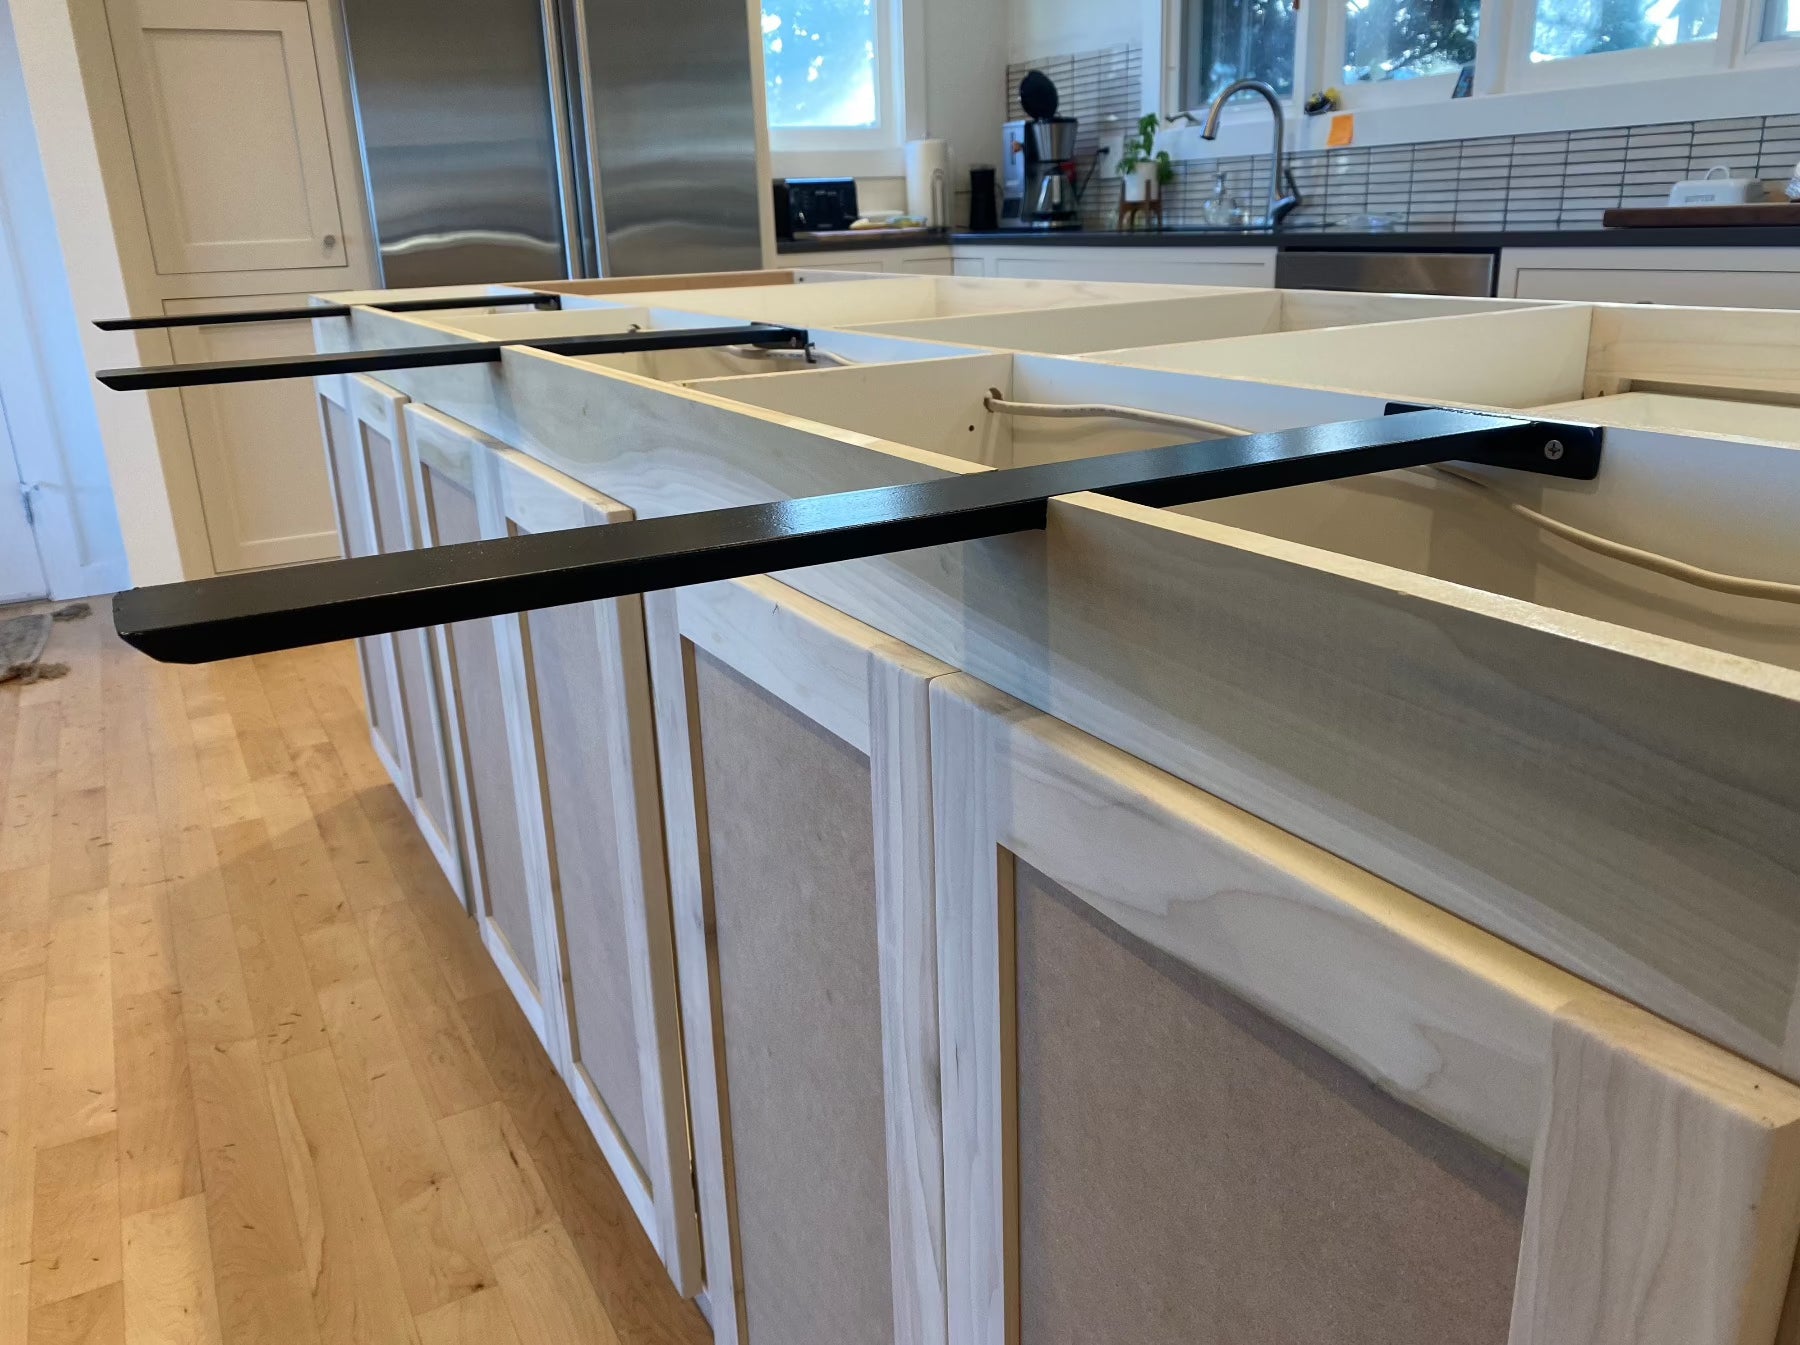 brackets to support countertop on cabinet